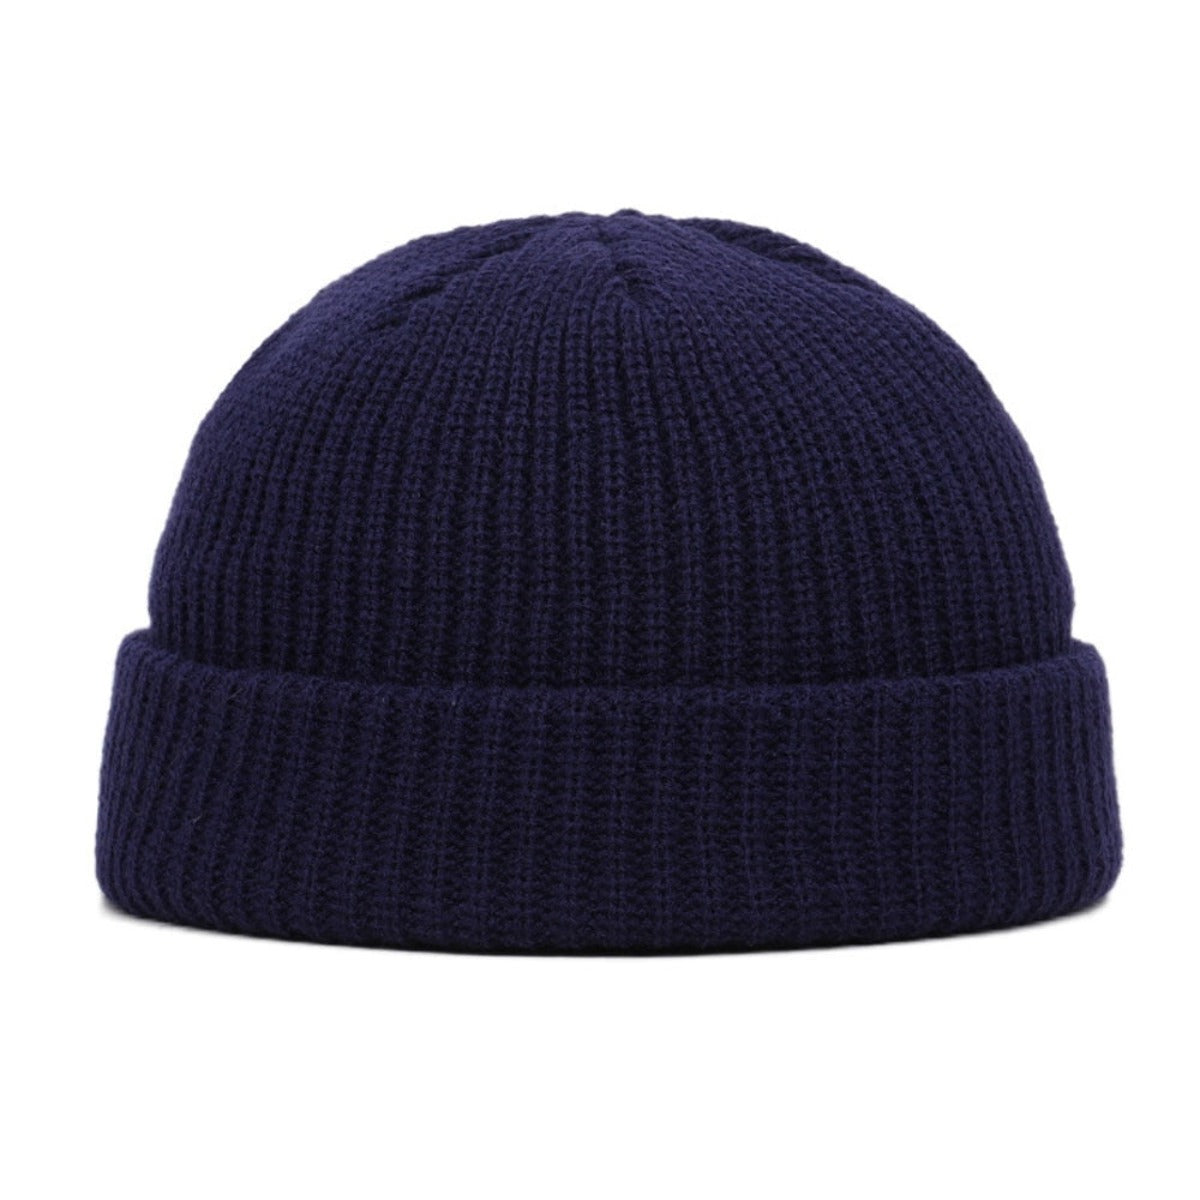 A Wool Knitted Skull Cap Beanie, perfect for the winter season, showcased on a clean white background.